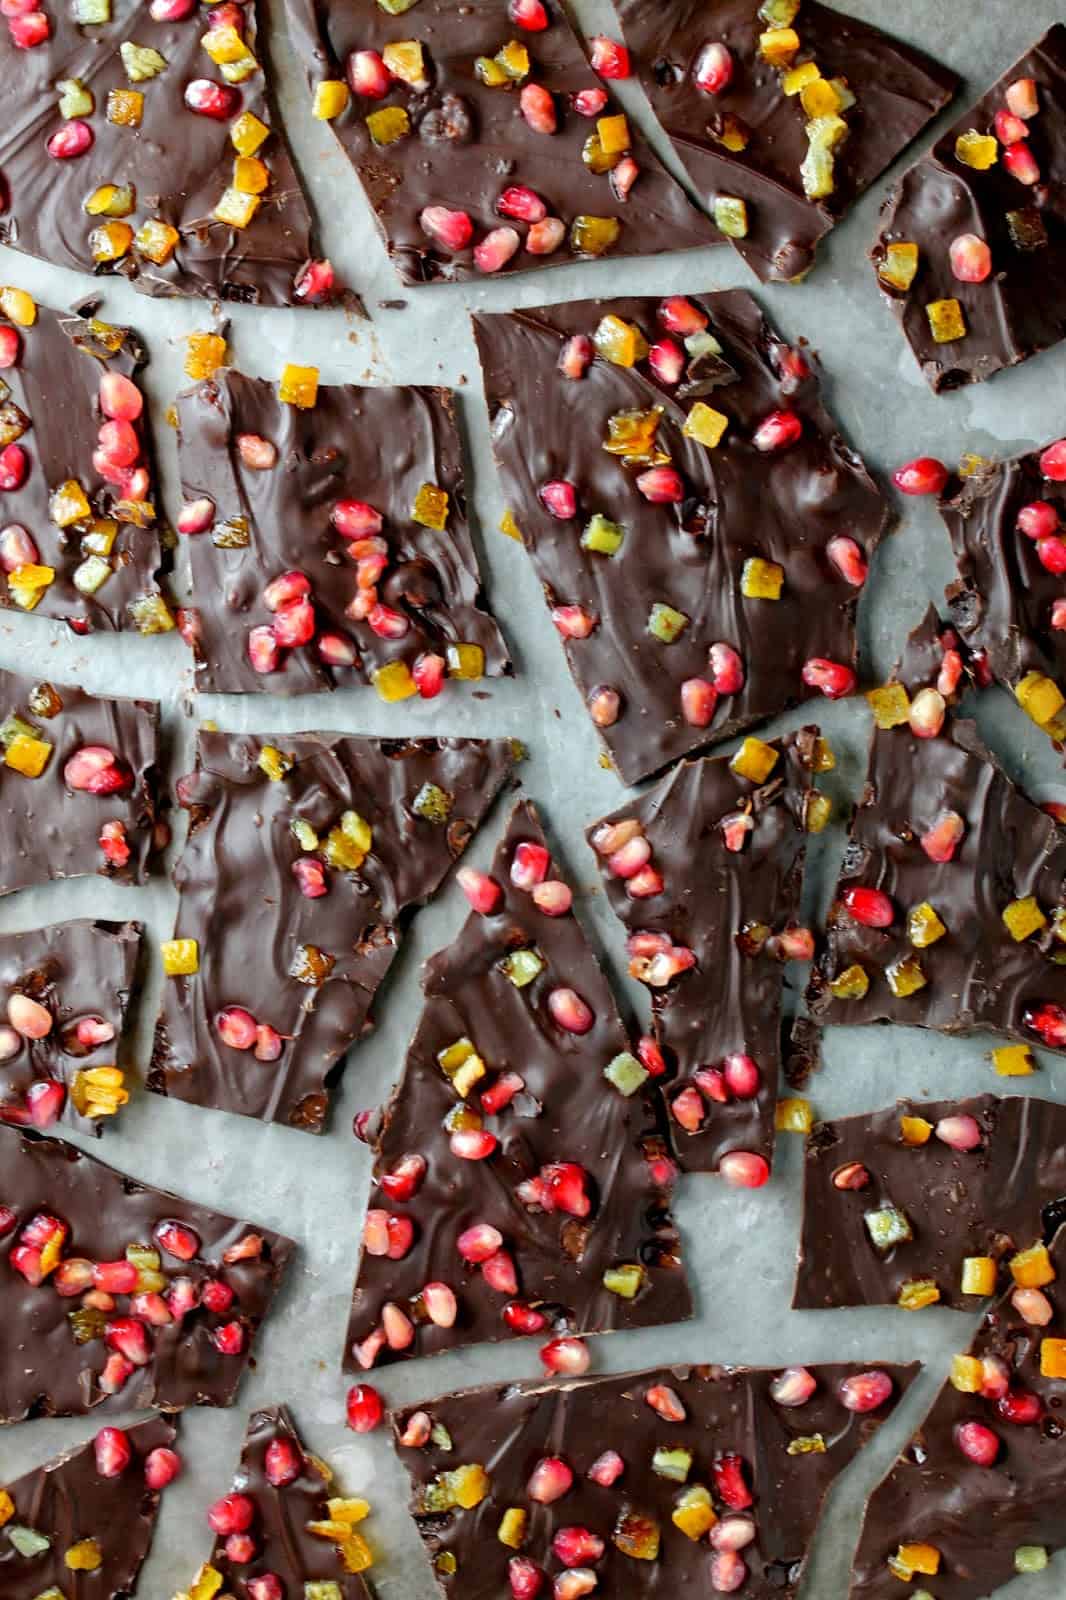 Rich chocolate bark sprinkled with fresh pomegranate and orange makes an easy to make and elegant treat